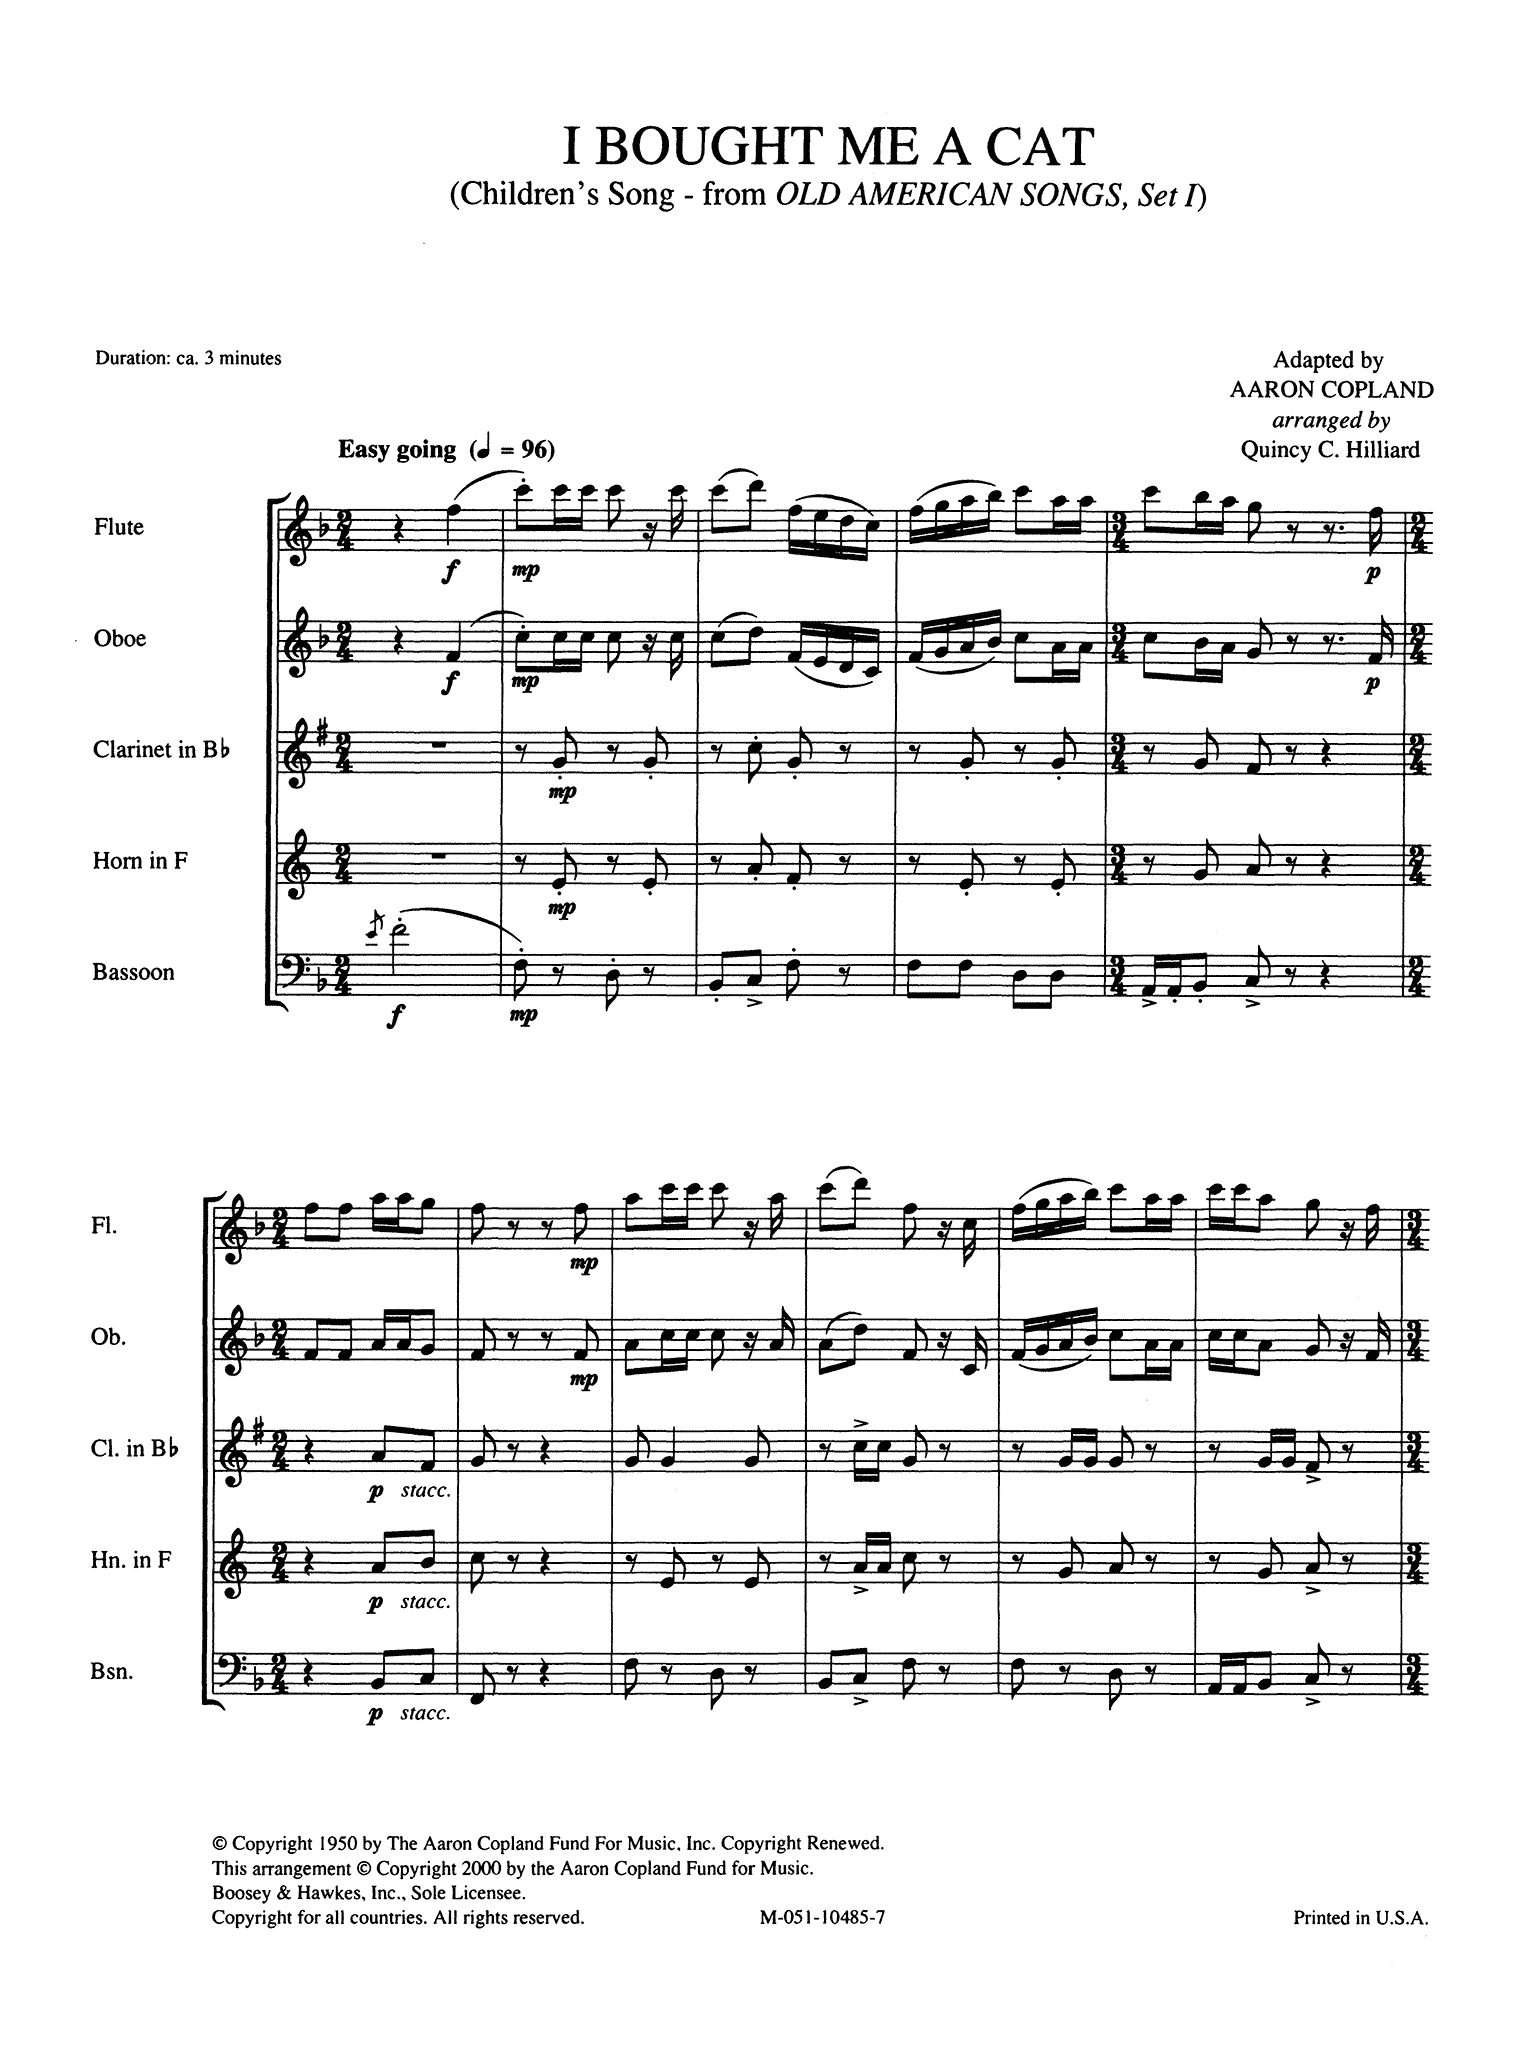 Copland I Bought Me A Cat, from Old American Songs, Set I wind quintet arrangement score